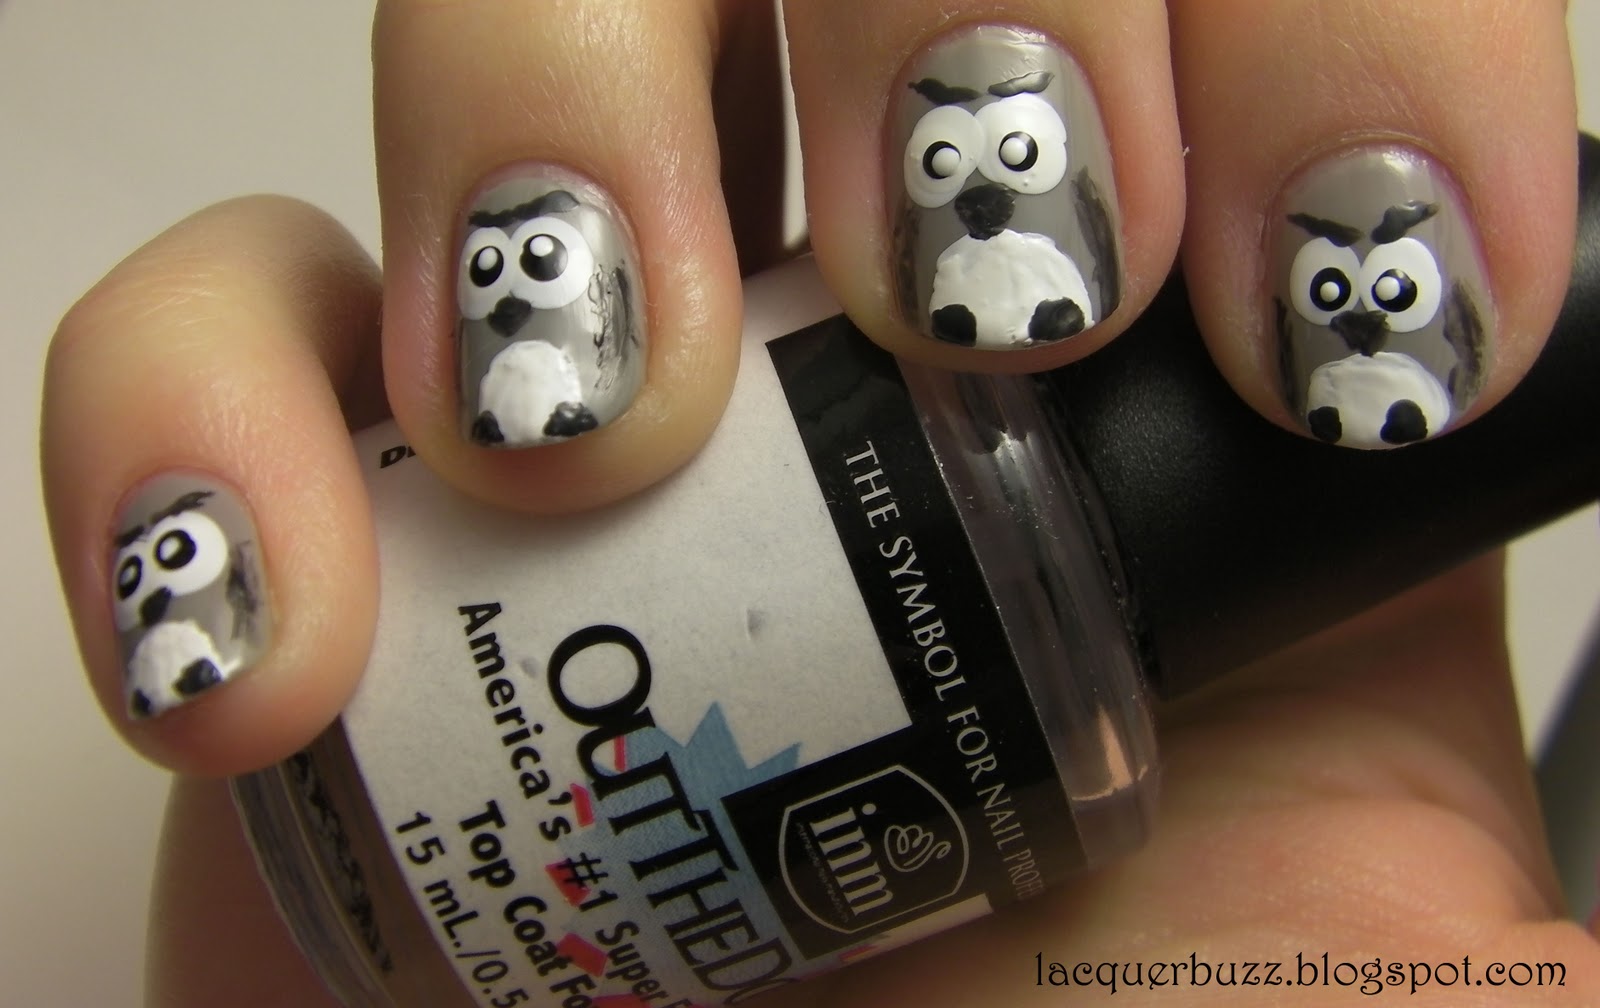 This is my first Halloween nail art and my first tutorial. I plan to 